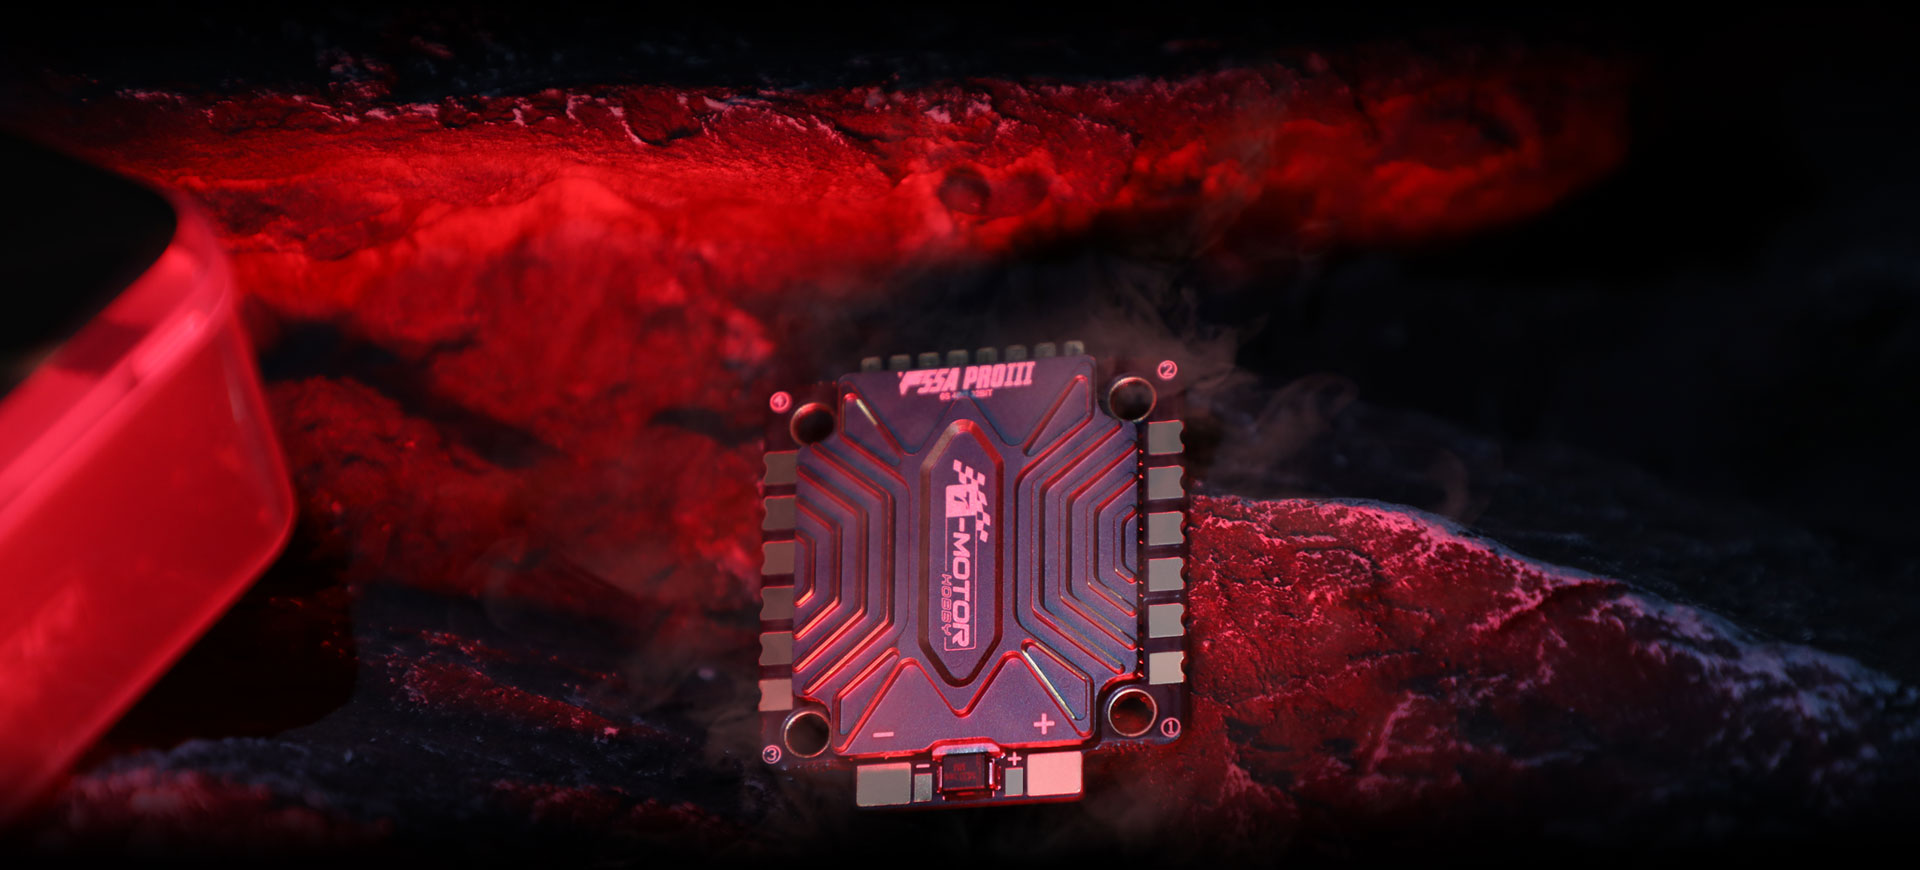 SPECIAL NEW HEAT SINK DESIGN EVENLY CONDUCTS ESC TEMPERATURE AND DISSIPATES HEAT